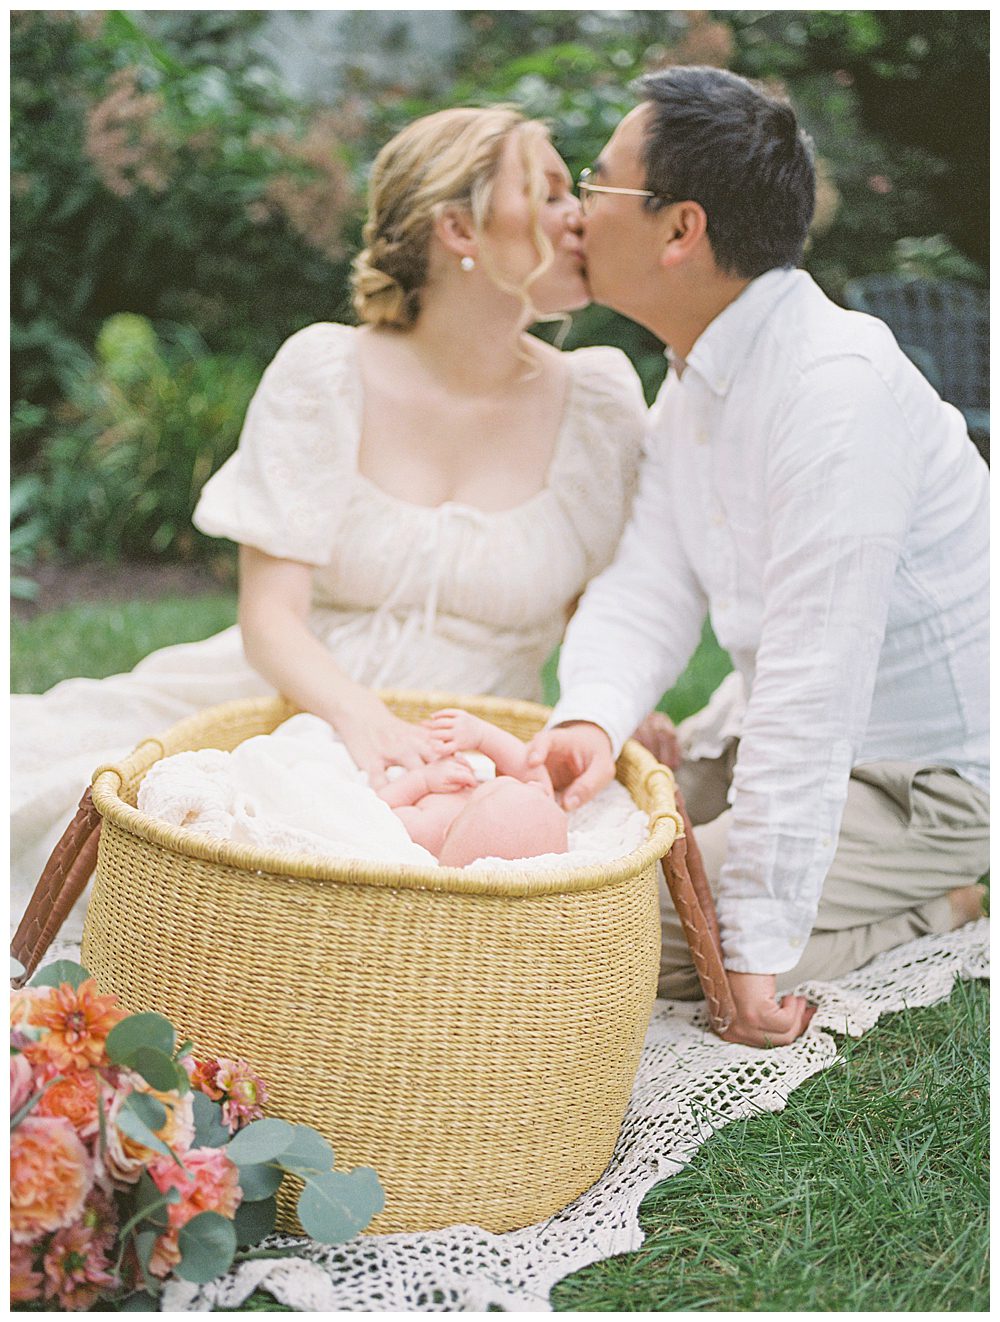 New parents lean in for a kiss while placing their hands on newborn daughter in a Moses basket during outdoor newborn session.